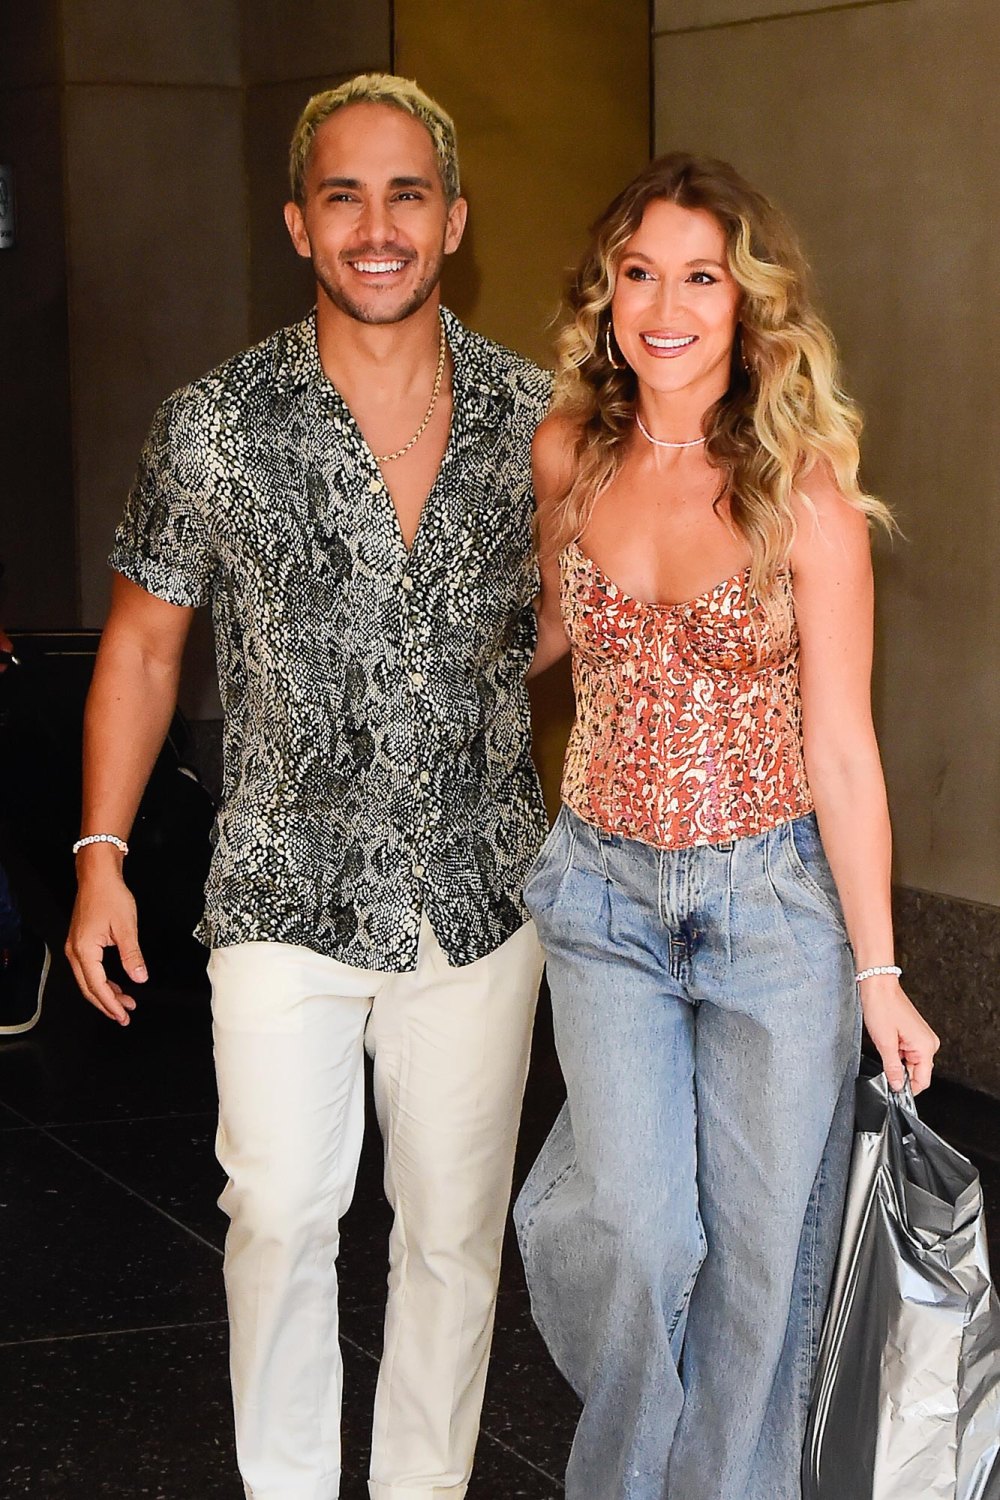 Alexa PenaVega says there are times she and Carlos PenaVega would have broken up if they weren't married 648